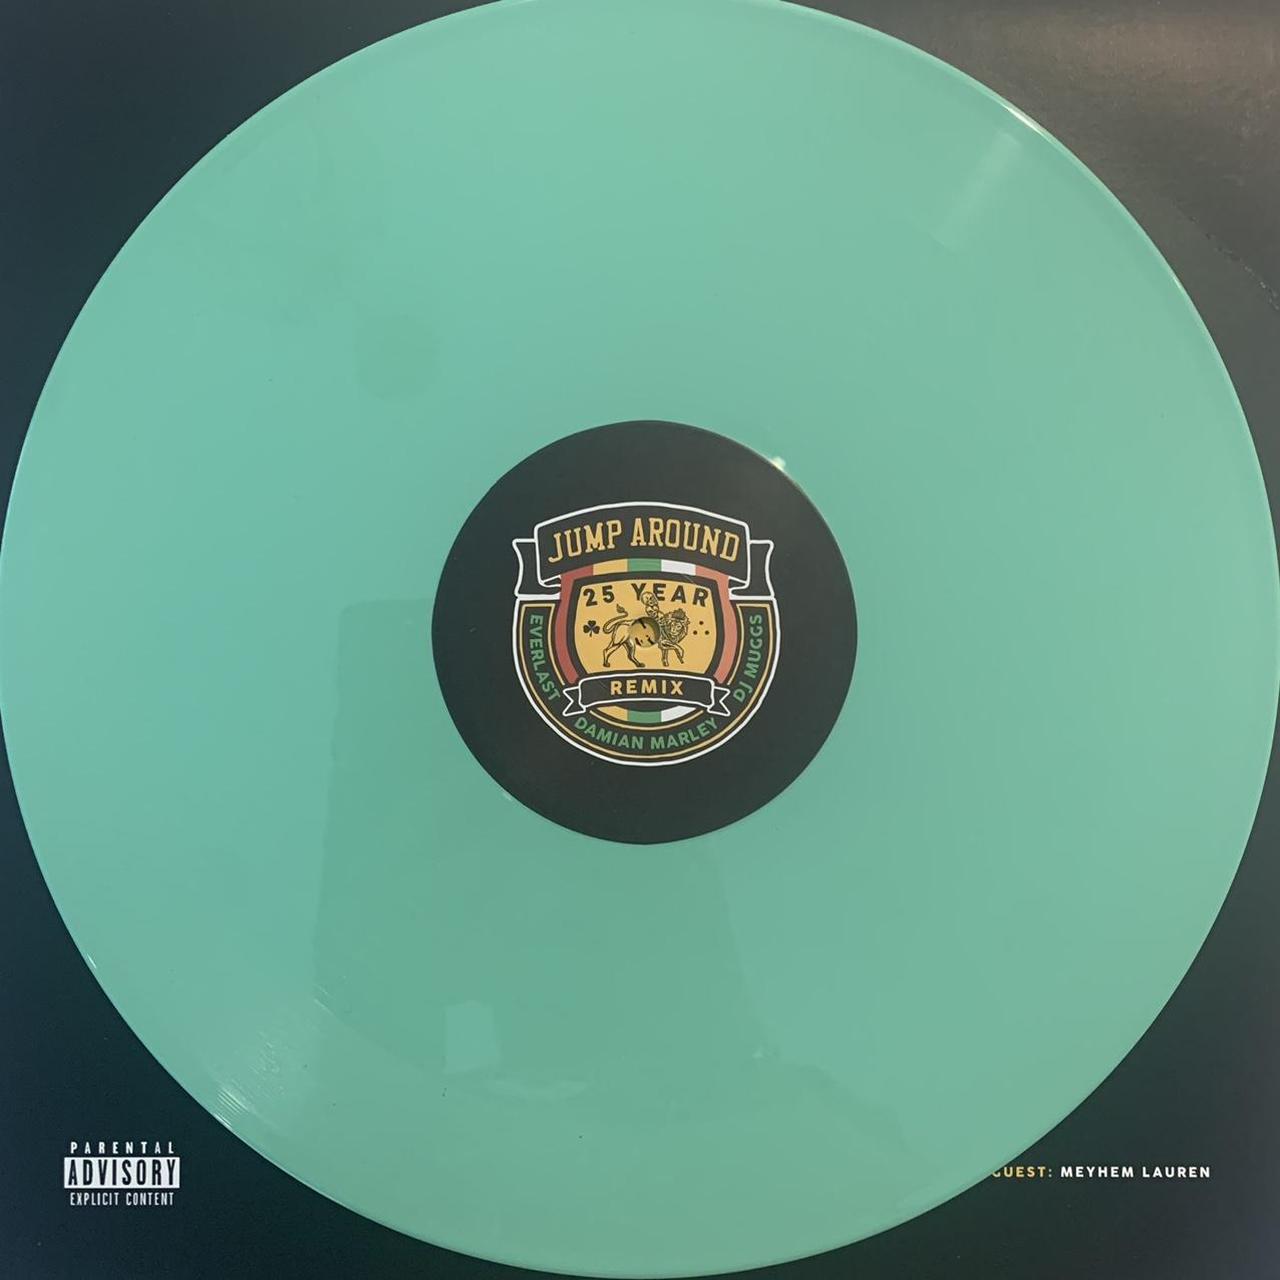 House of Pain “Jump Around” 25 Year Anniversary Limited Edition 12inch Green Vinyl